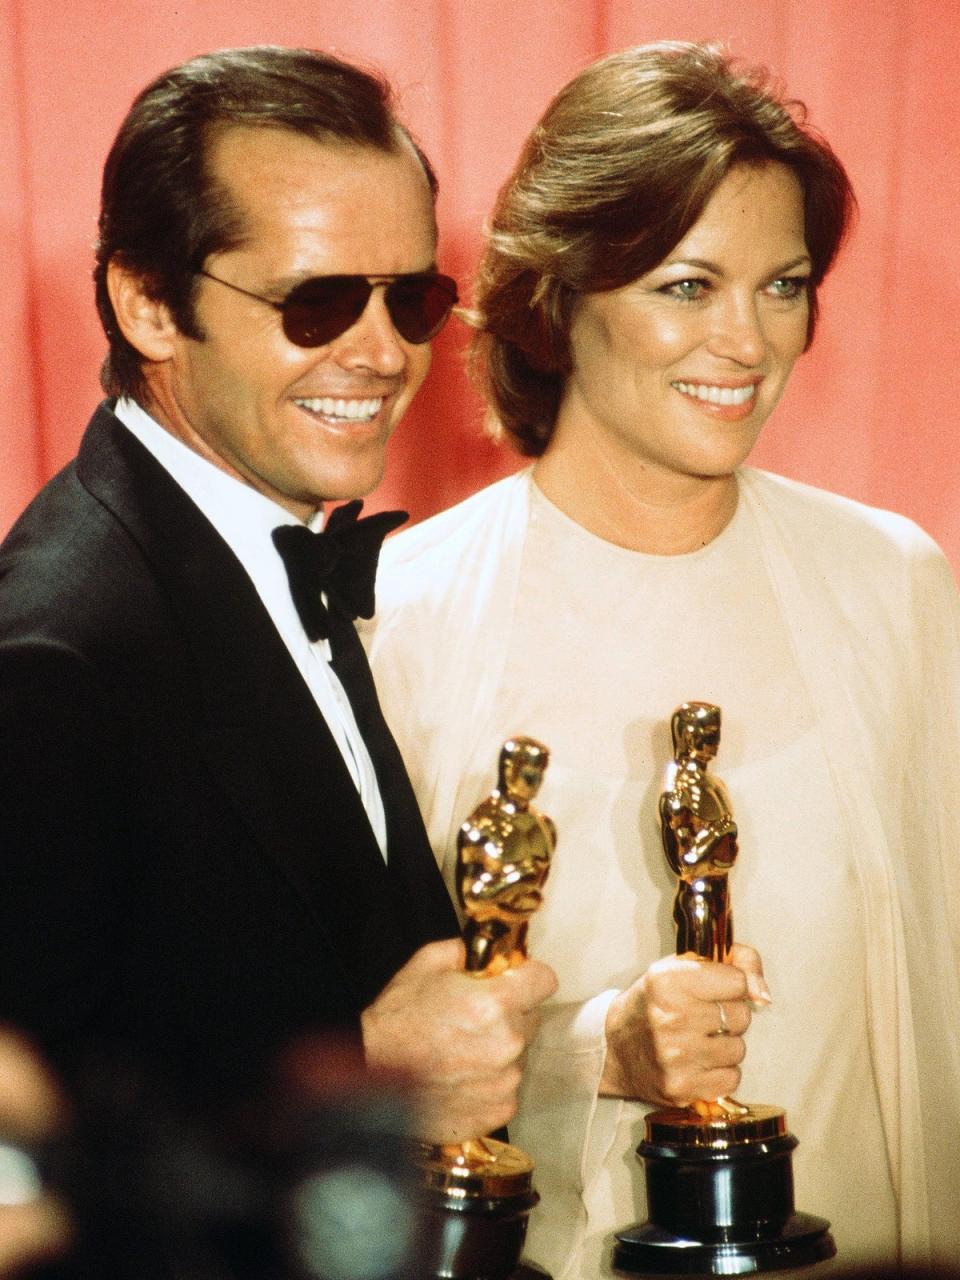 Fletcher with Jack Nicholson after winning the Best Actress Oscar at the Academy Awards in 1976 (Getty)